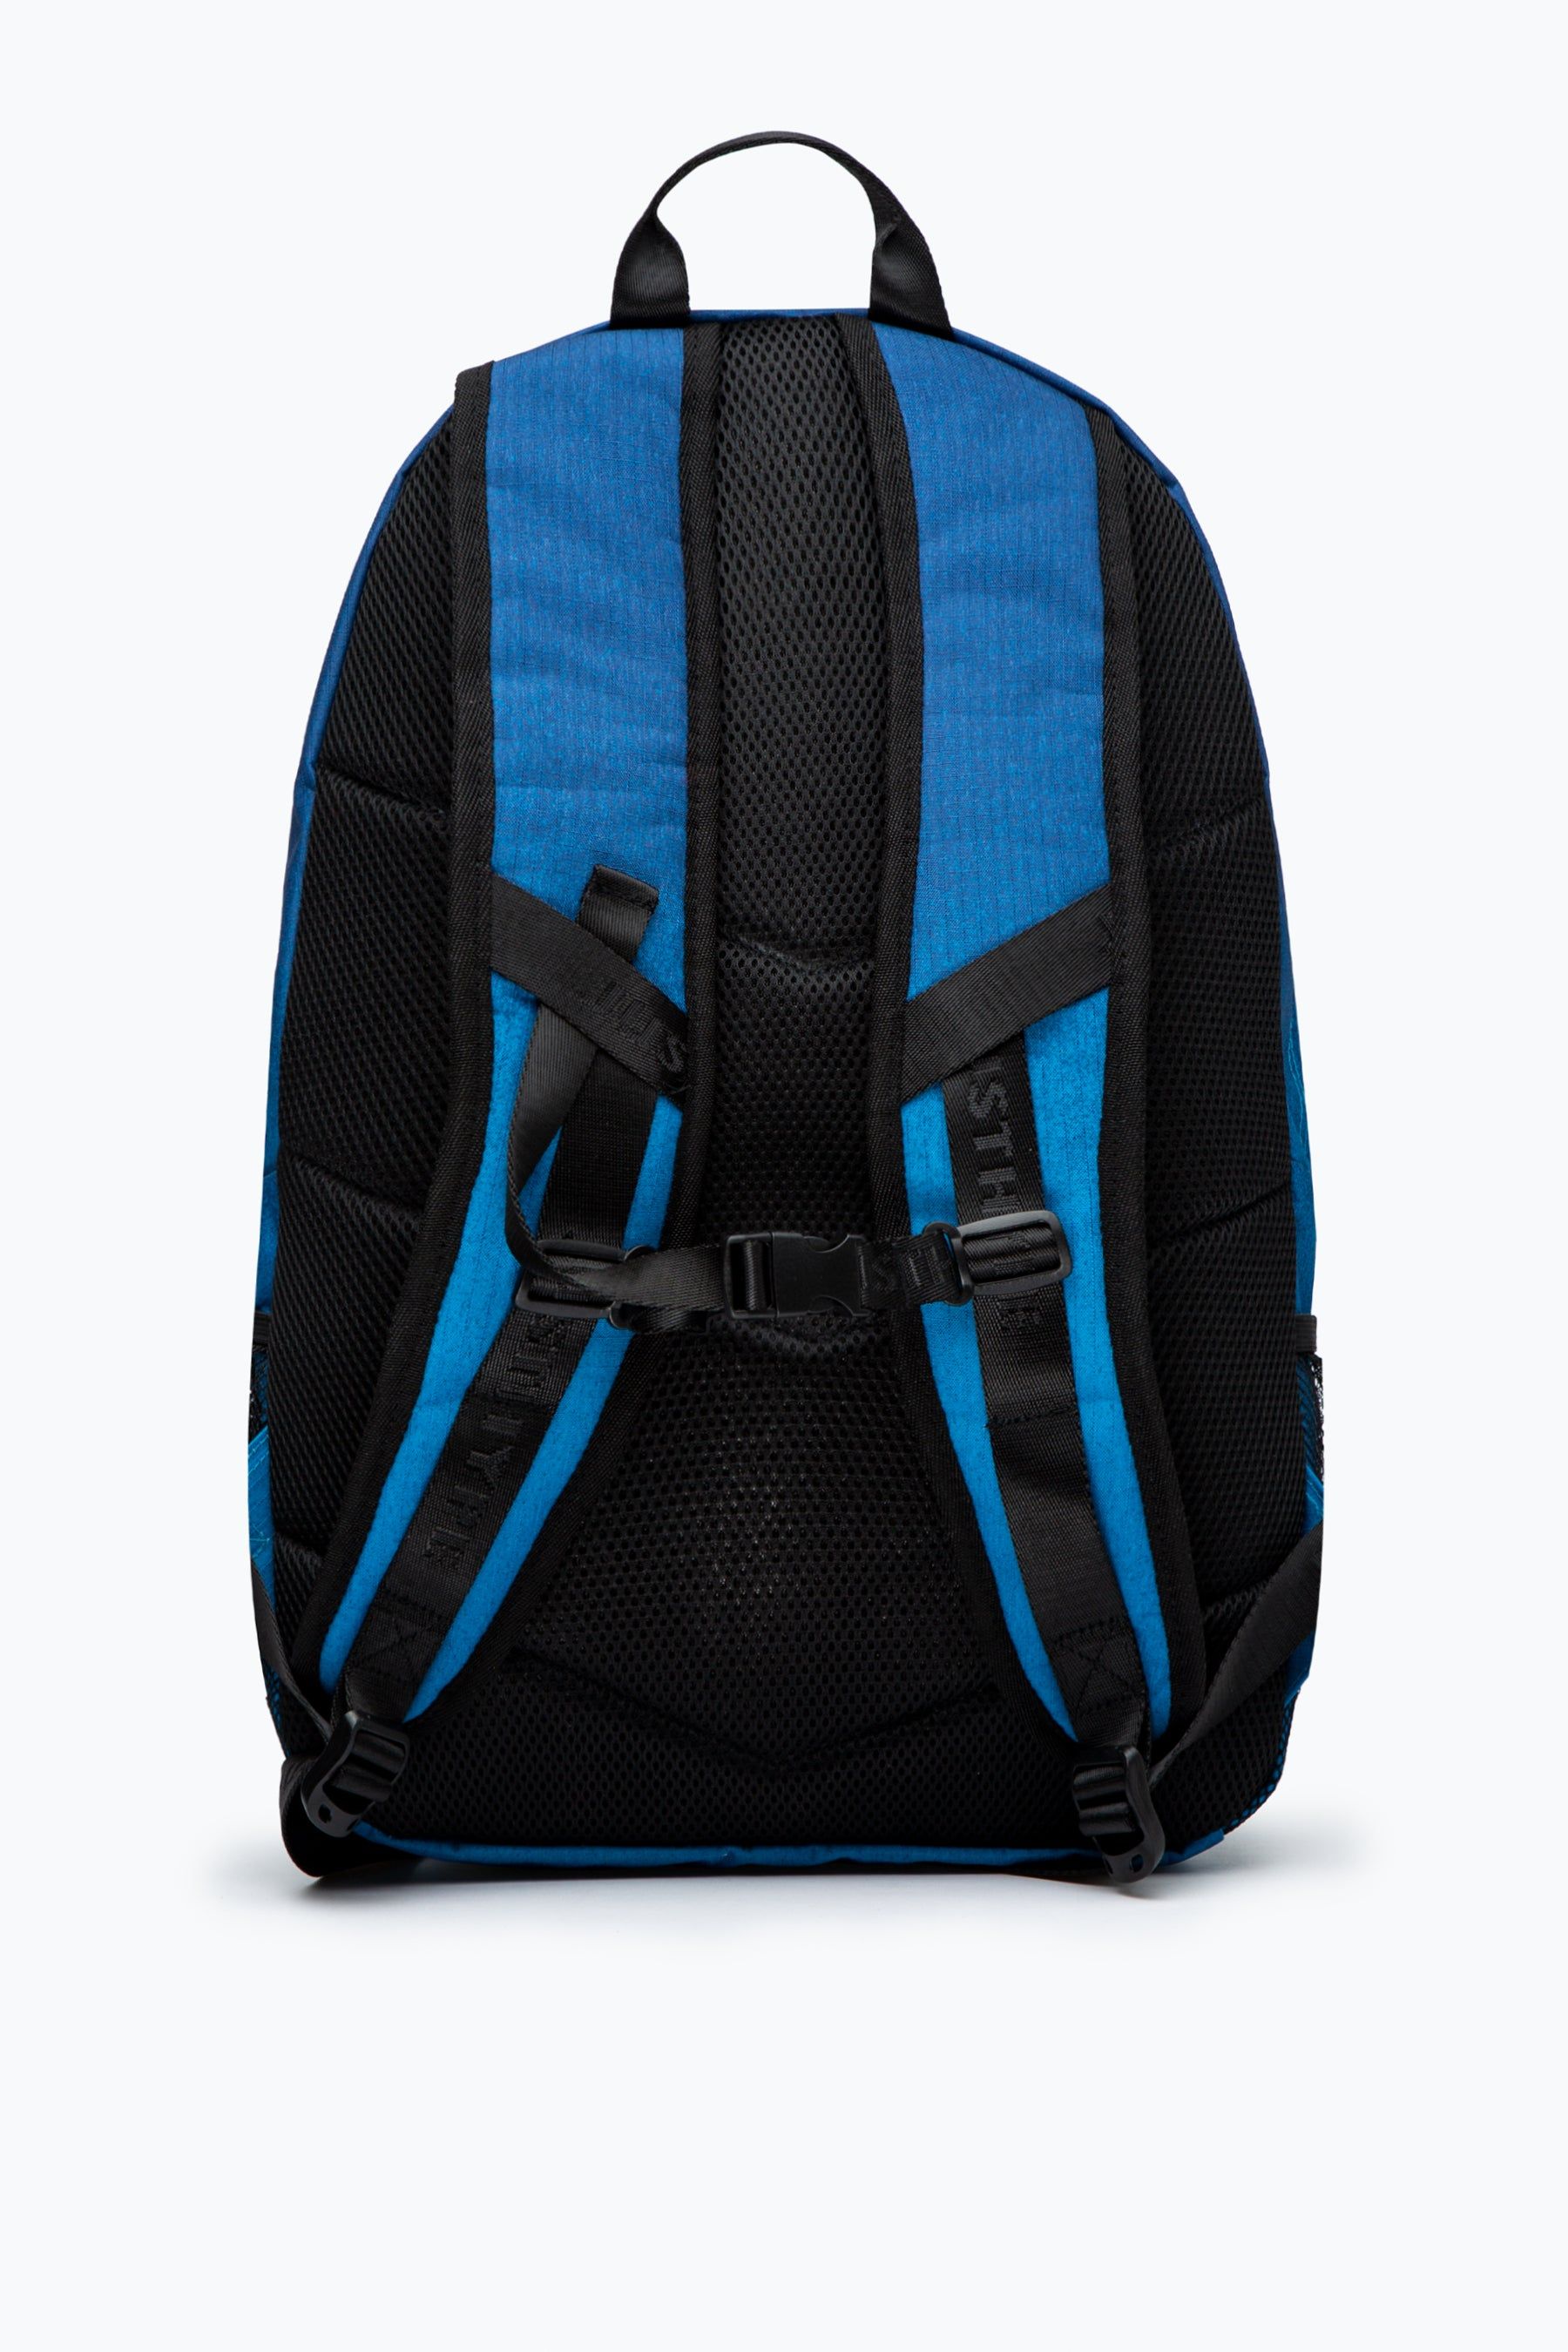 The HYPE. Blue Speckle Fade Military Patch Maxi Backpack is the perfect transporter for all your back to school, work, or gym essentials. Designed with embossed inside lining and compartments to keep your essentials in their own compartments. This is a backpack from our maxi range, with extra storage space to transport the extra goods you need. Boasting the HYPE. logo on a raised rubber badge, branded zips and straps are designed to offer supreme comfort. Please ensure you wipe clean only.